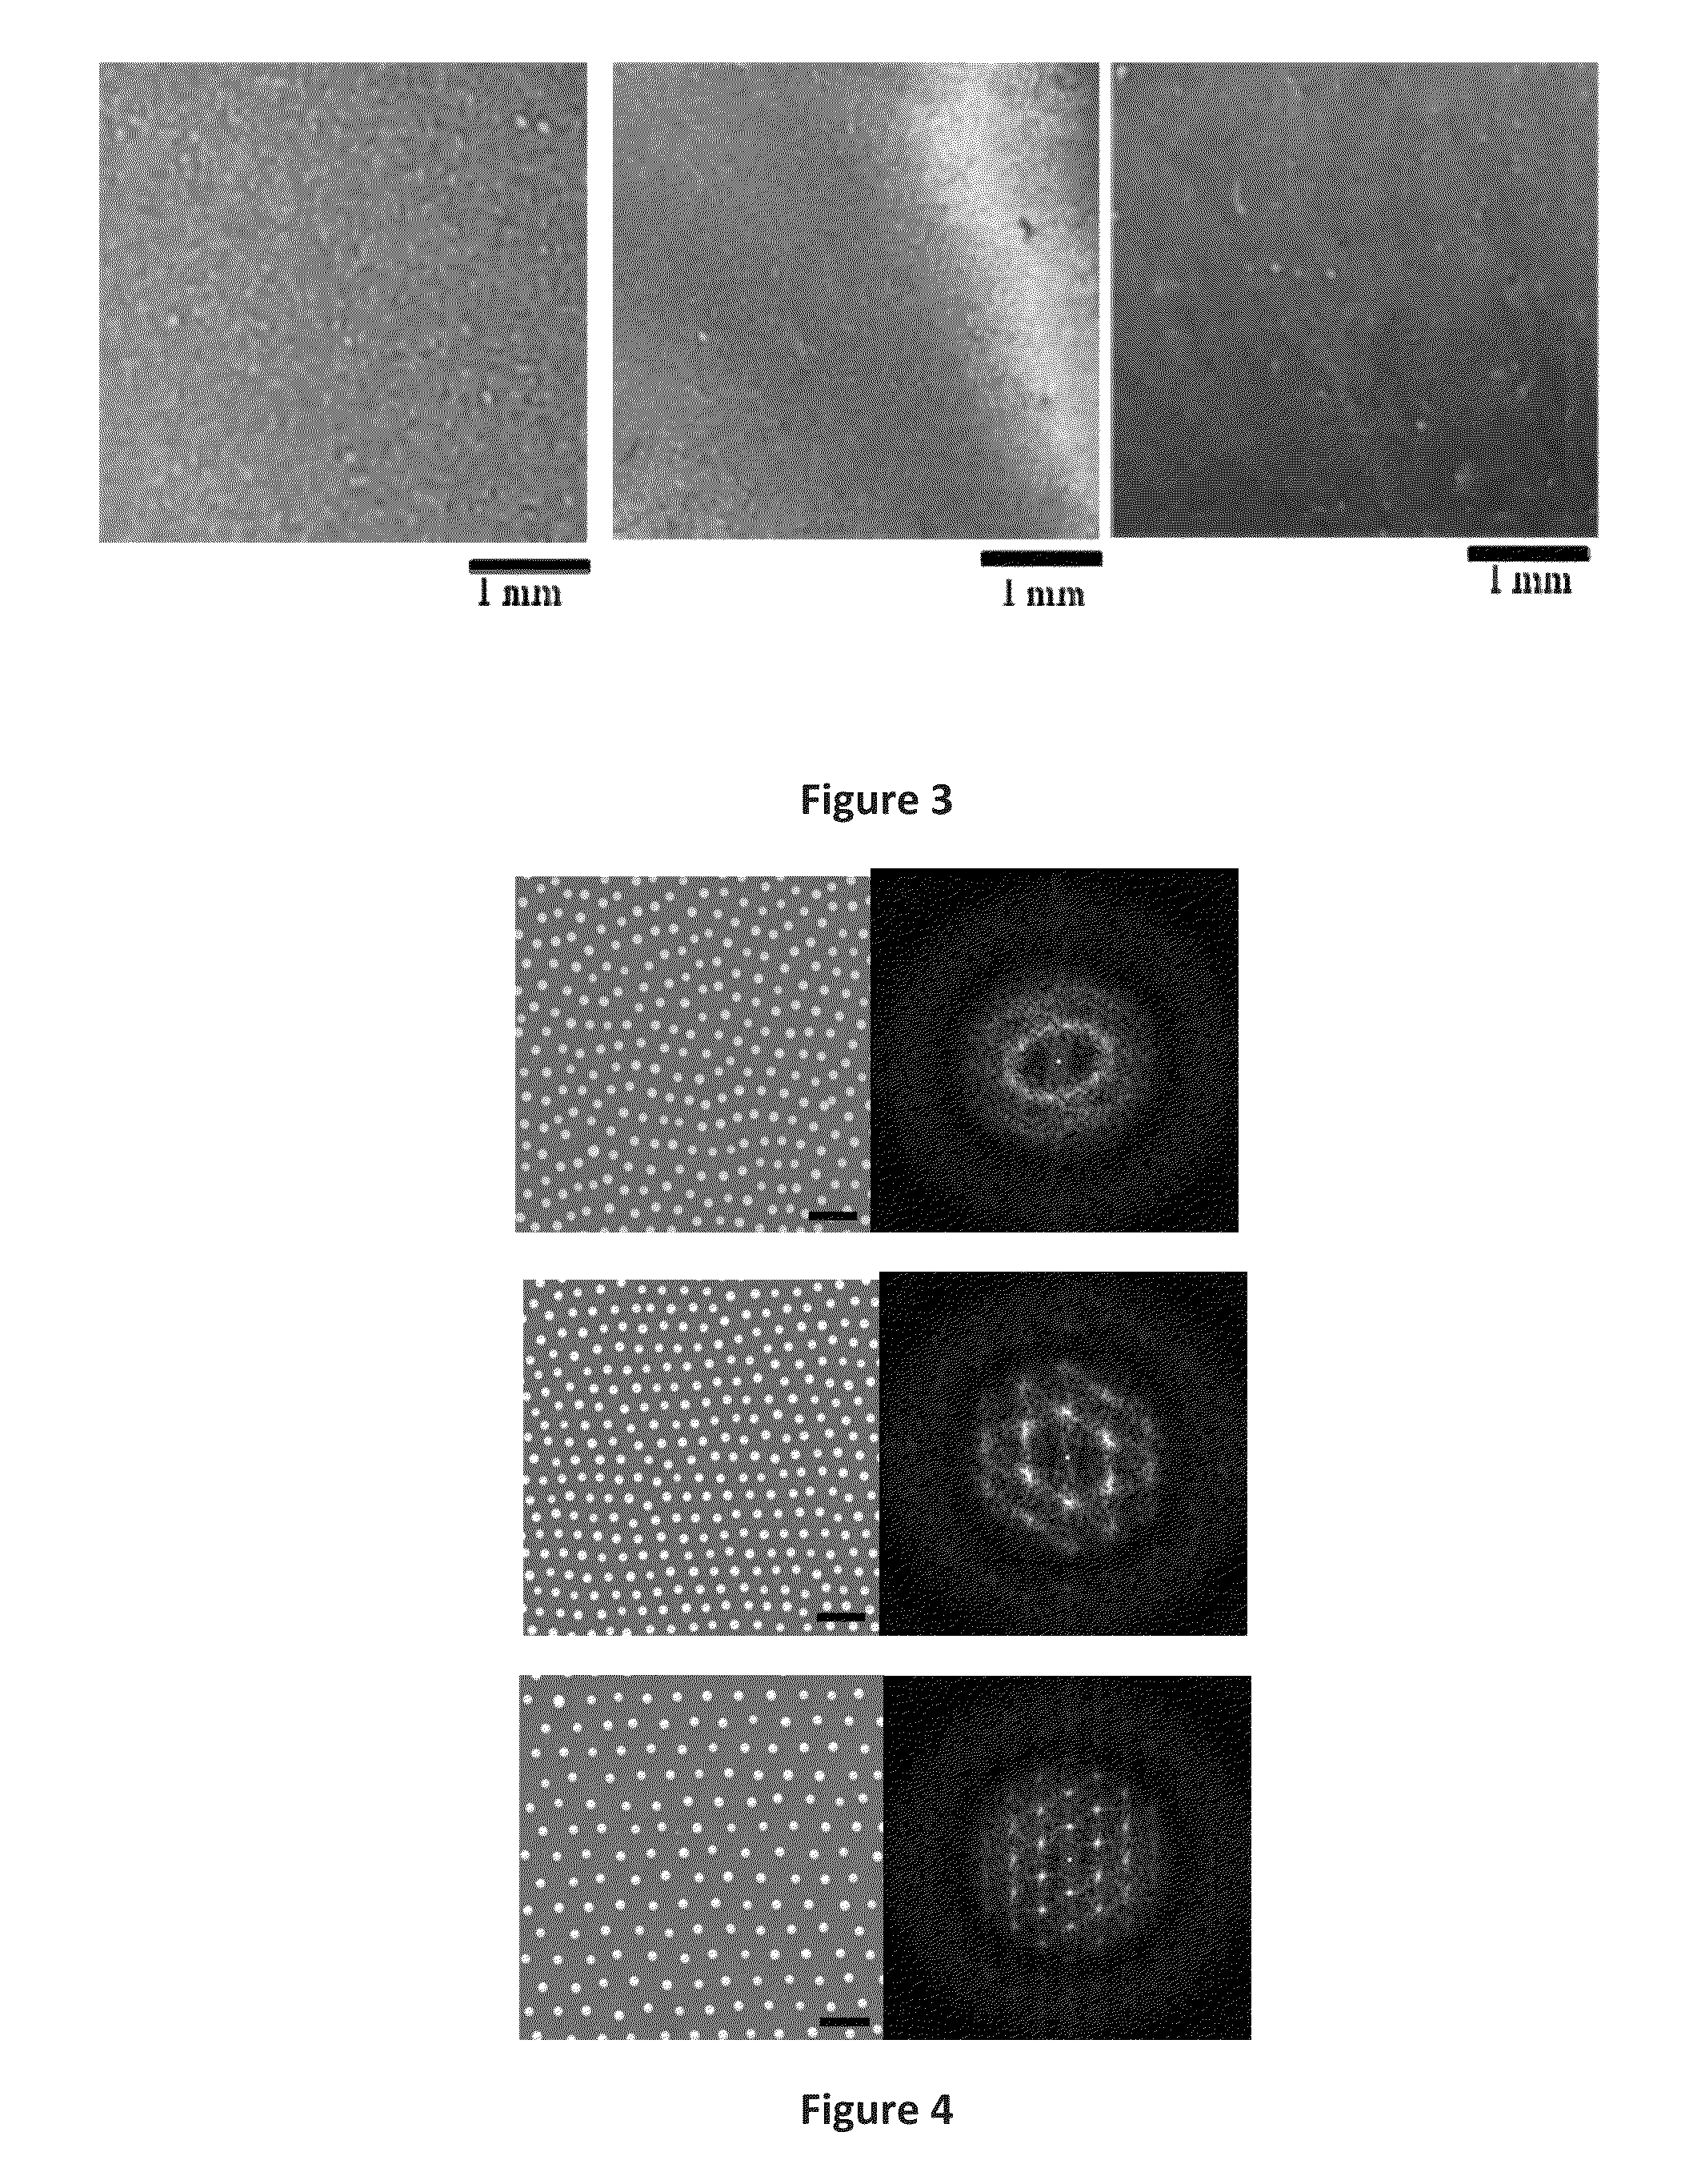 Colloidal lithography methods for fabricating microscopic and nanoscopic particle patterns on substrate surfaces